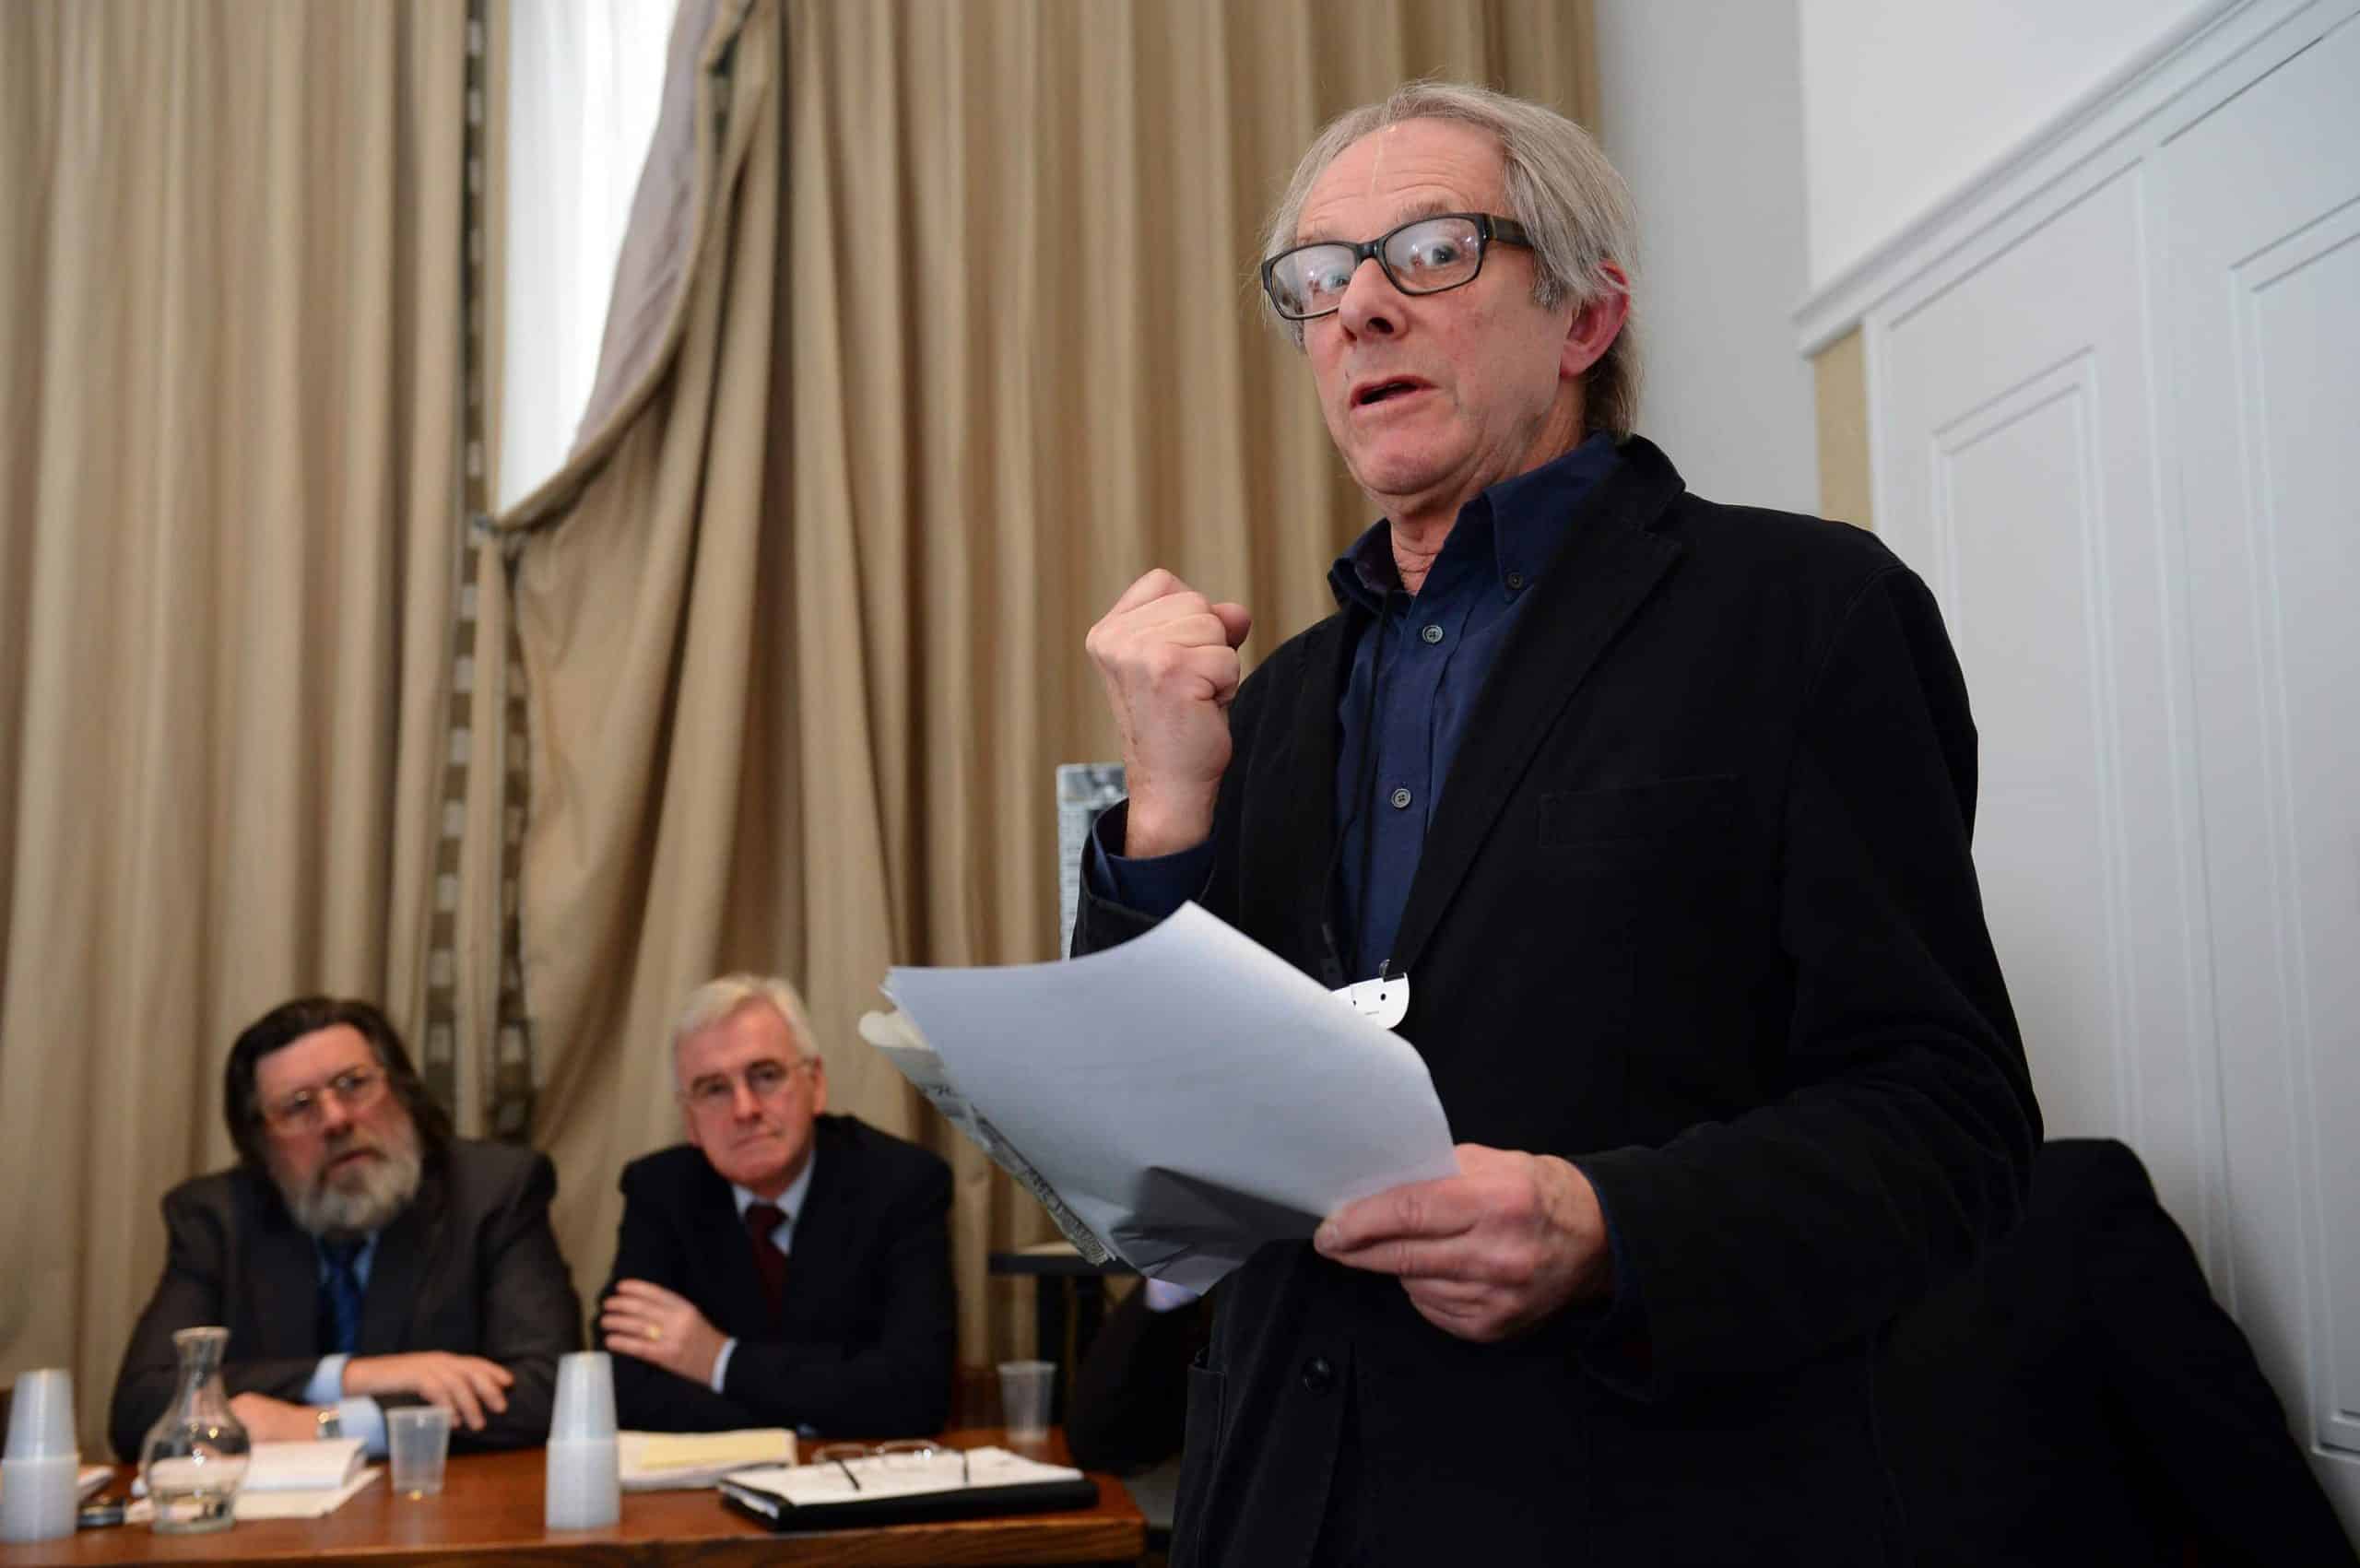 Reactions as Ken Loach says he’s been kicked out of Labour Party